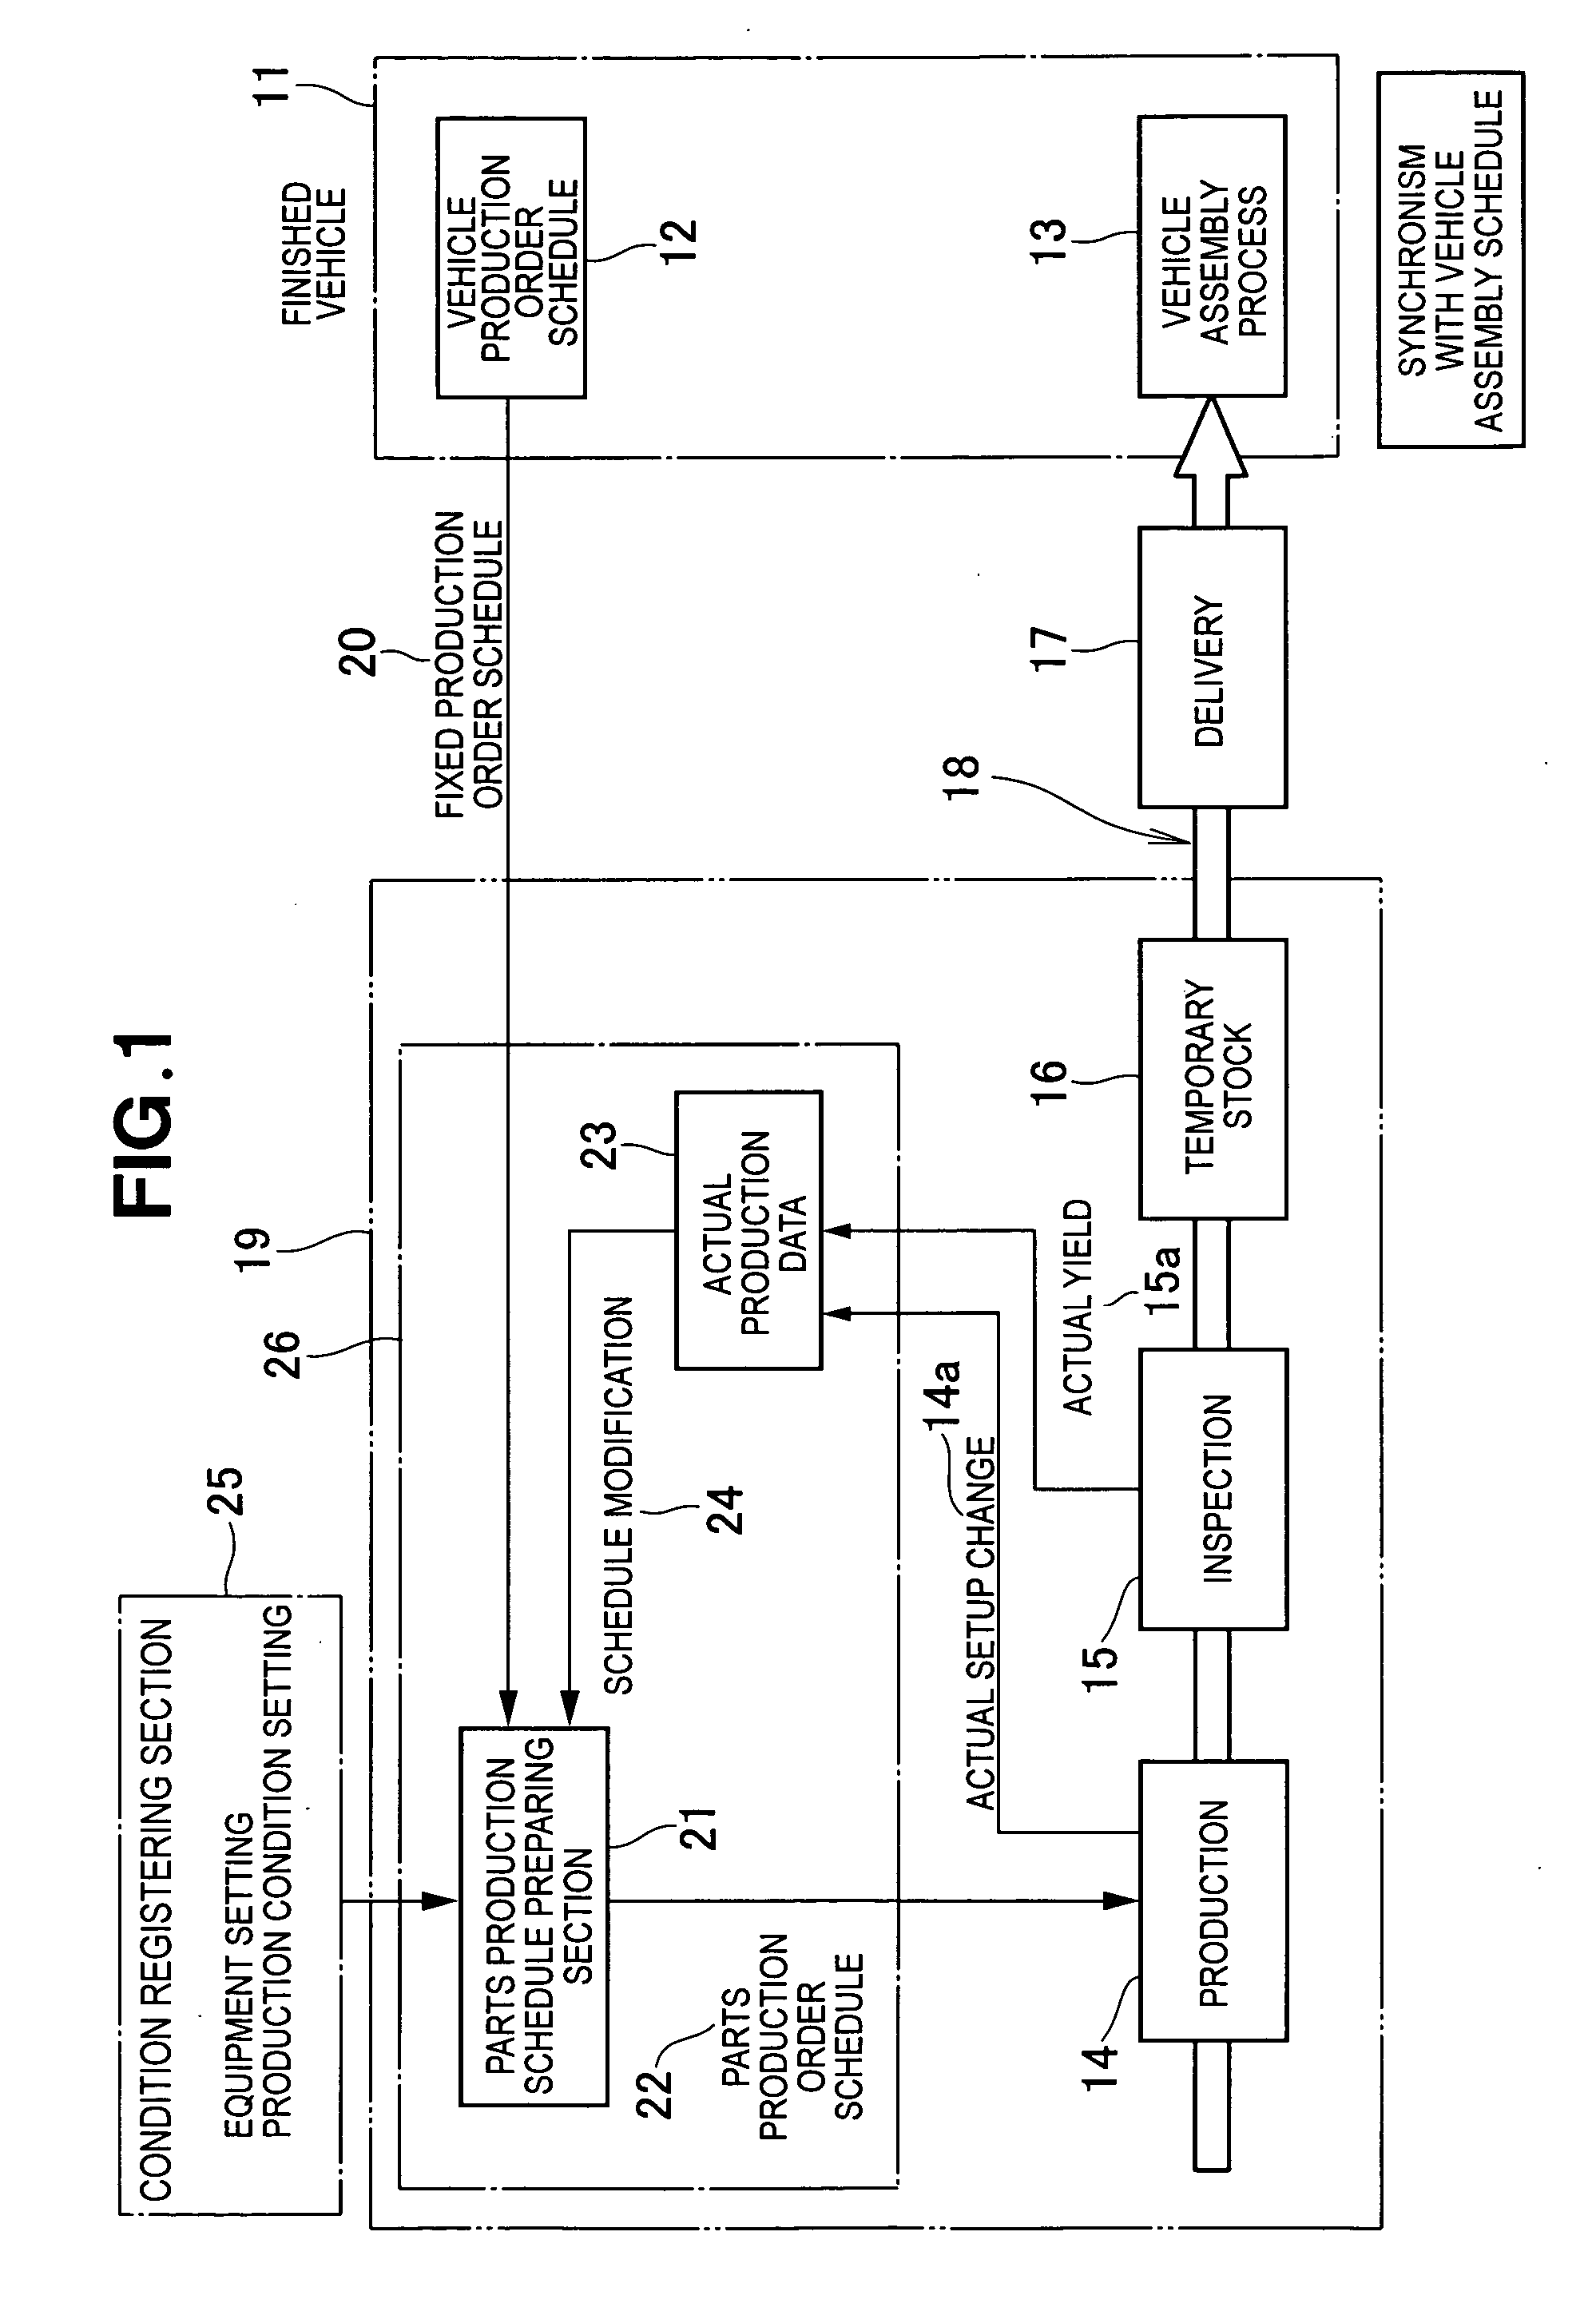 Parts production scheduling method